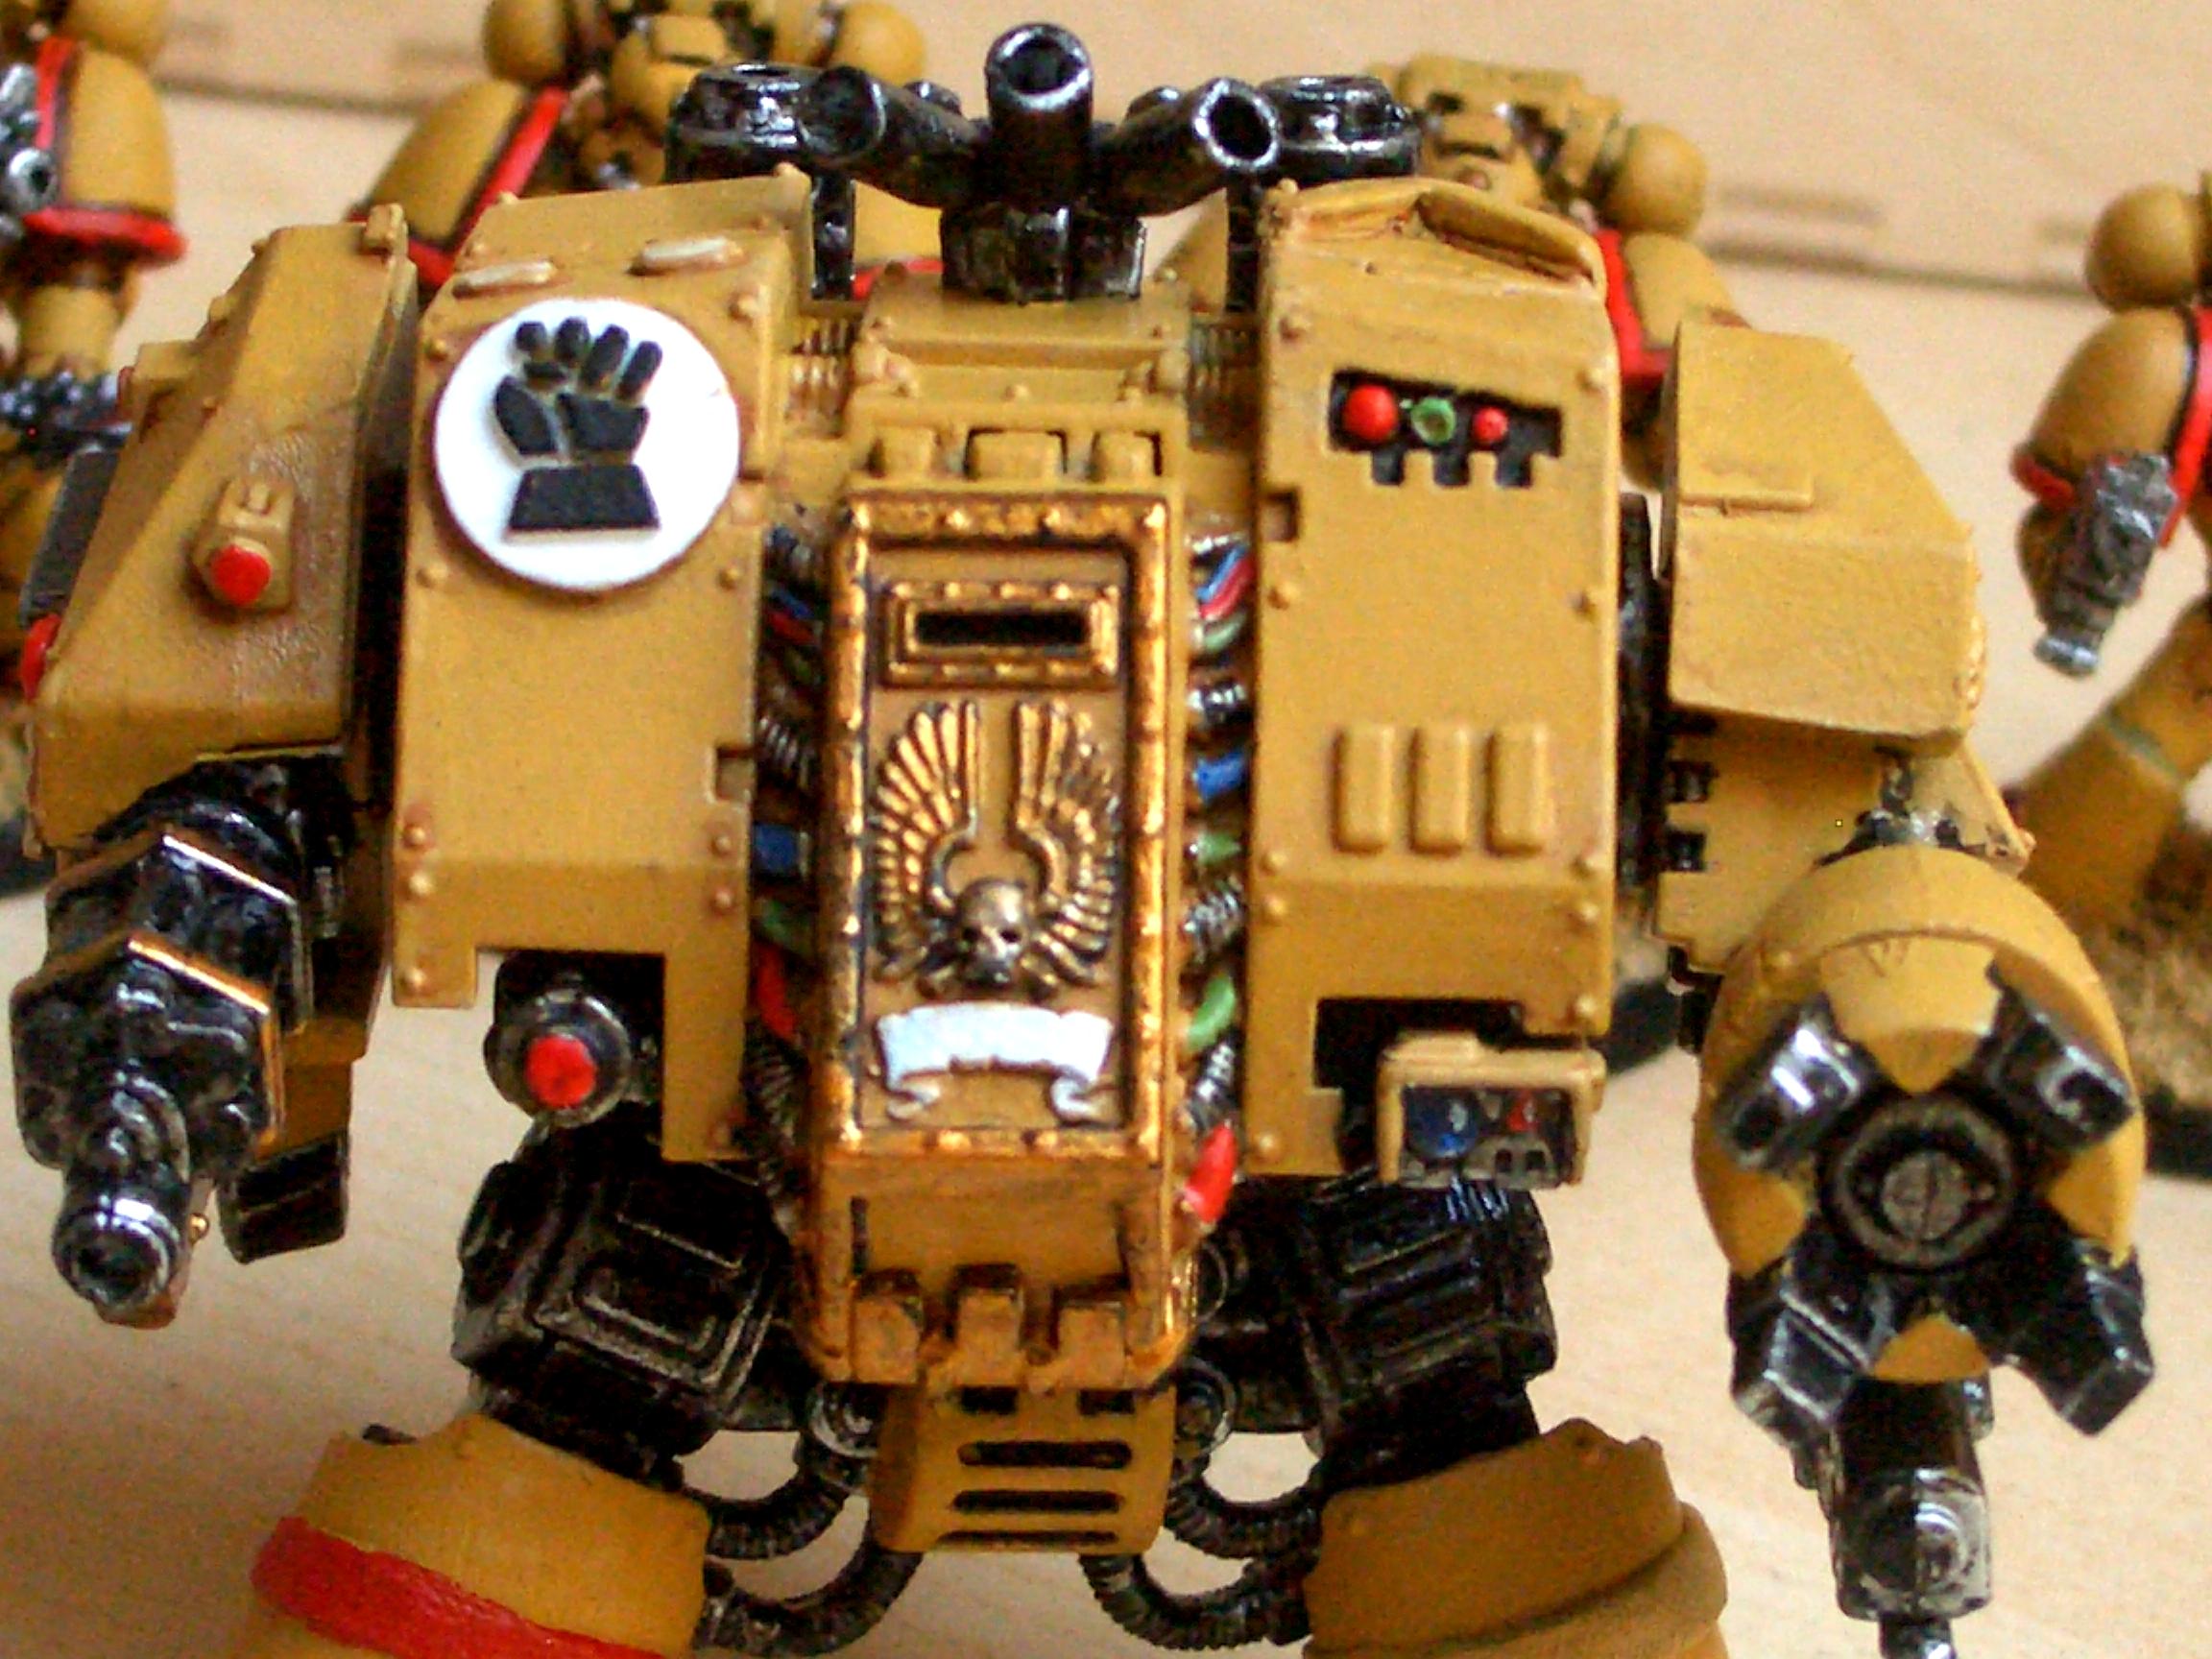 Dreadnought, Imperial Fists, Space Marines, Warhammer 40,000